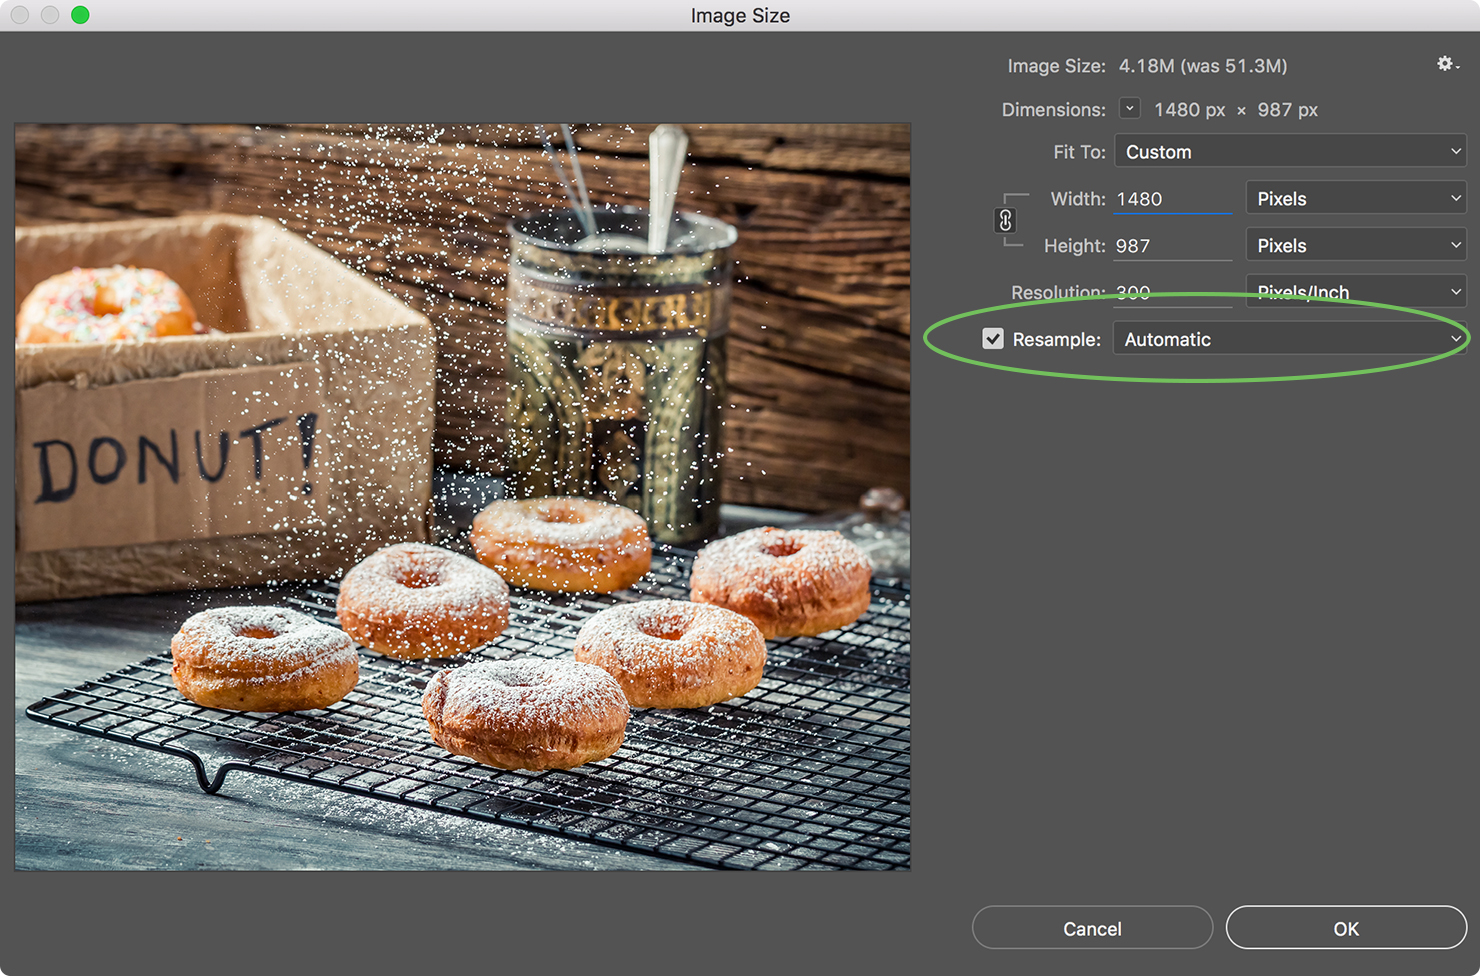 Learning how to resize and image: A screen demonstrating how to resample an image in photoshop